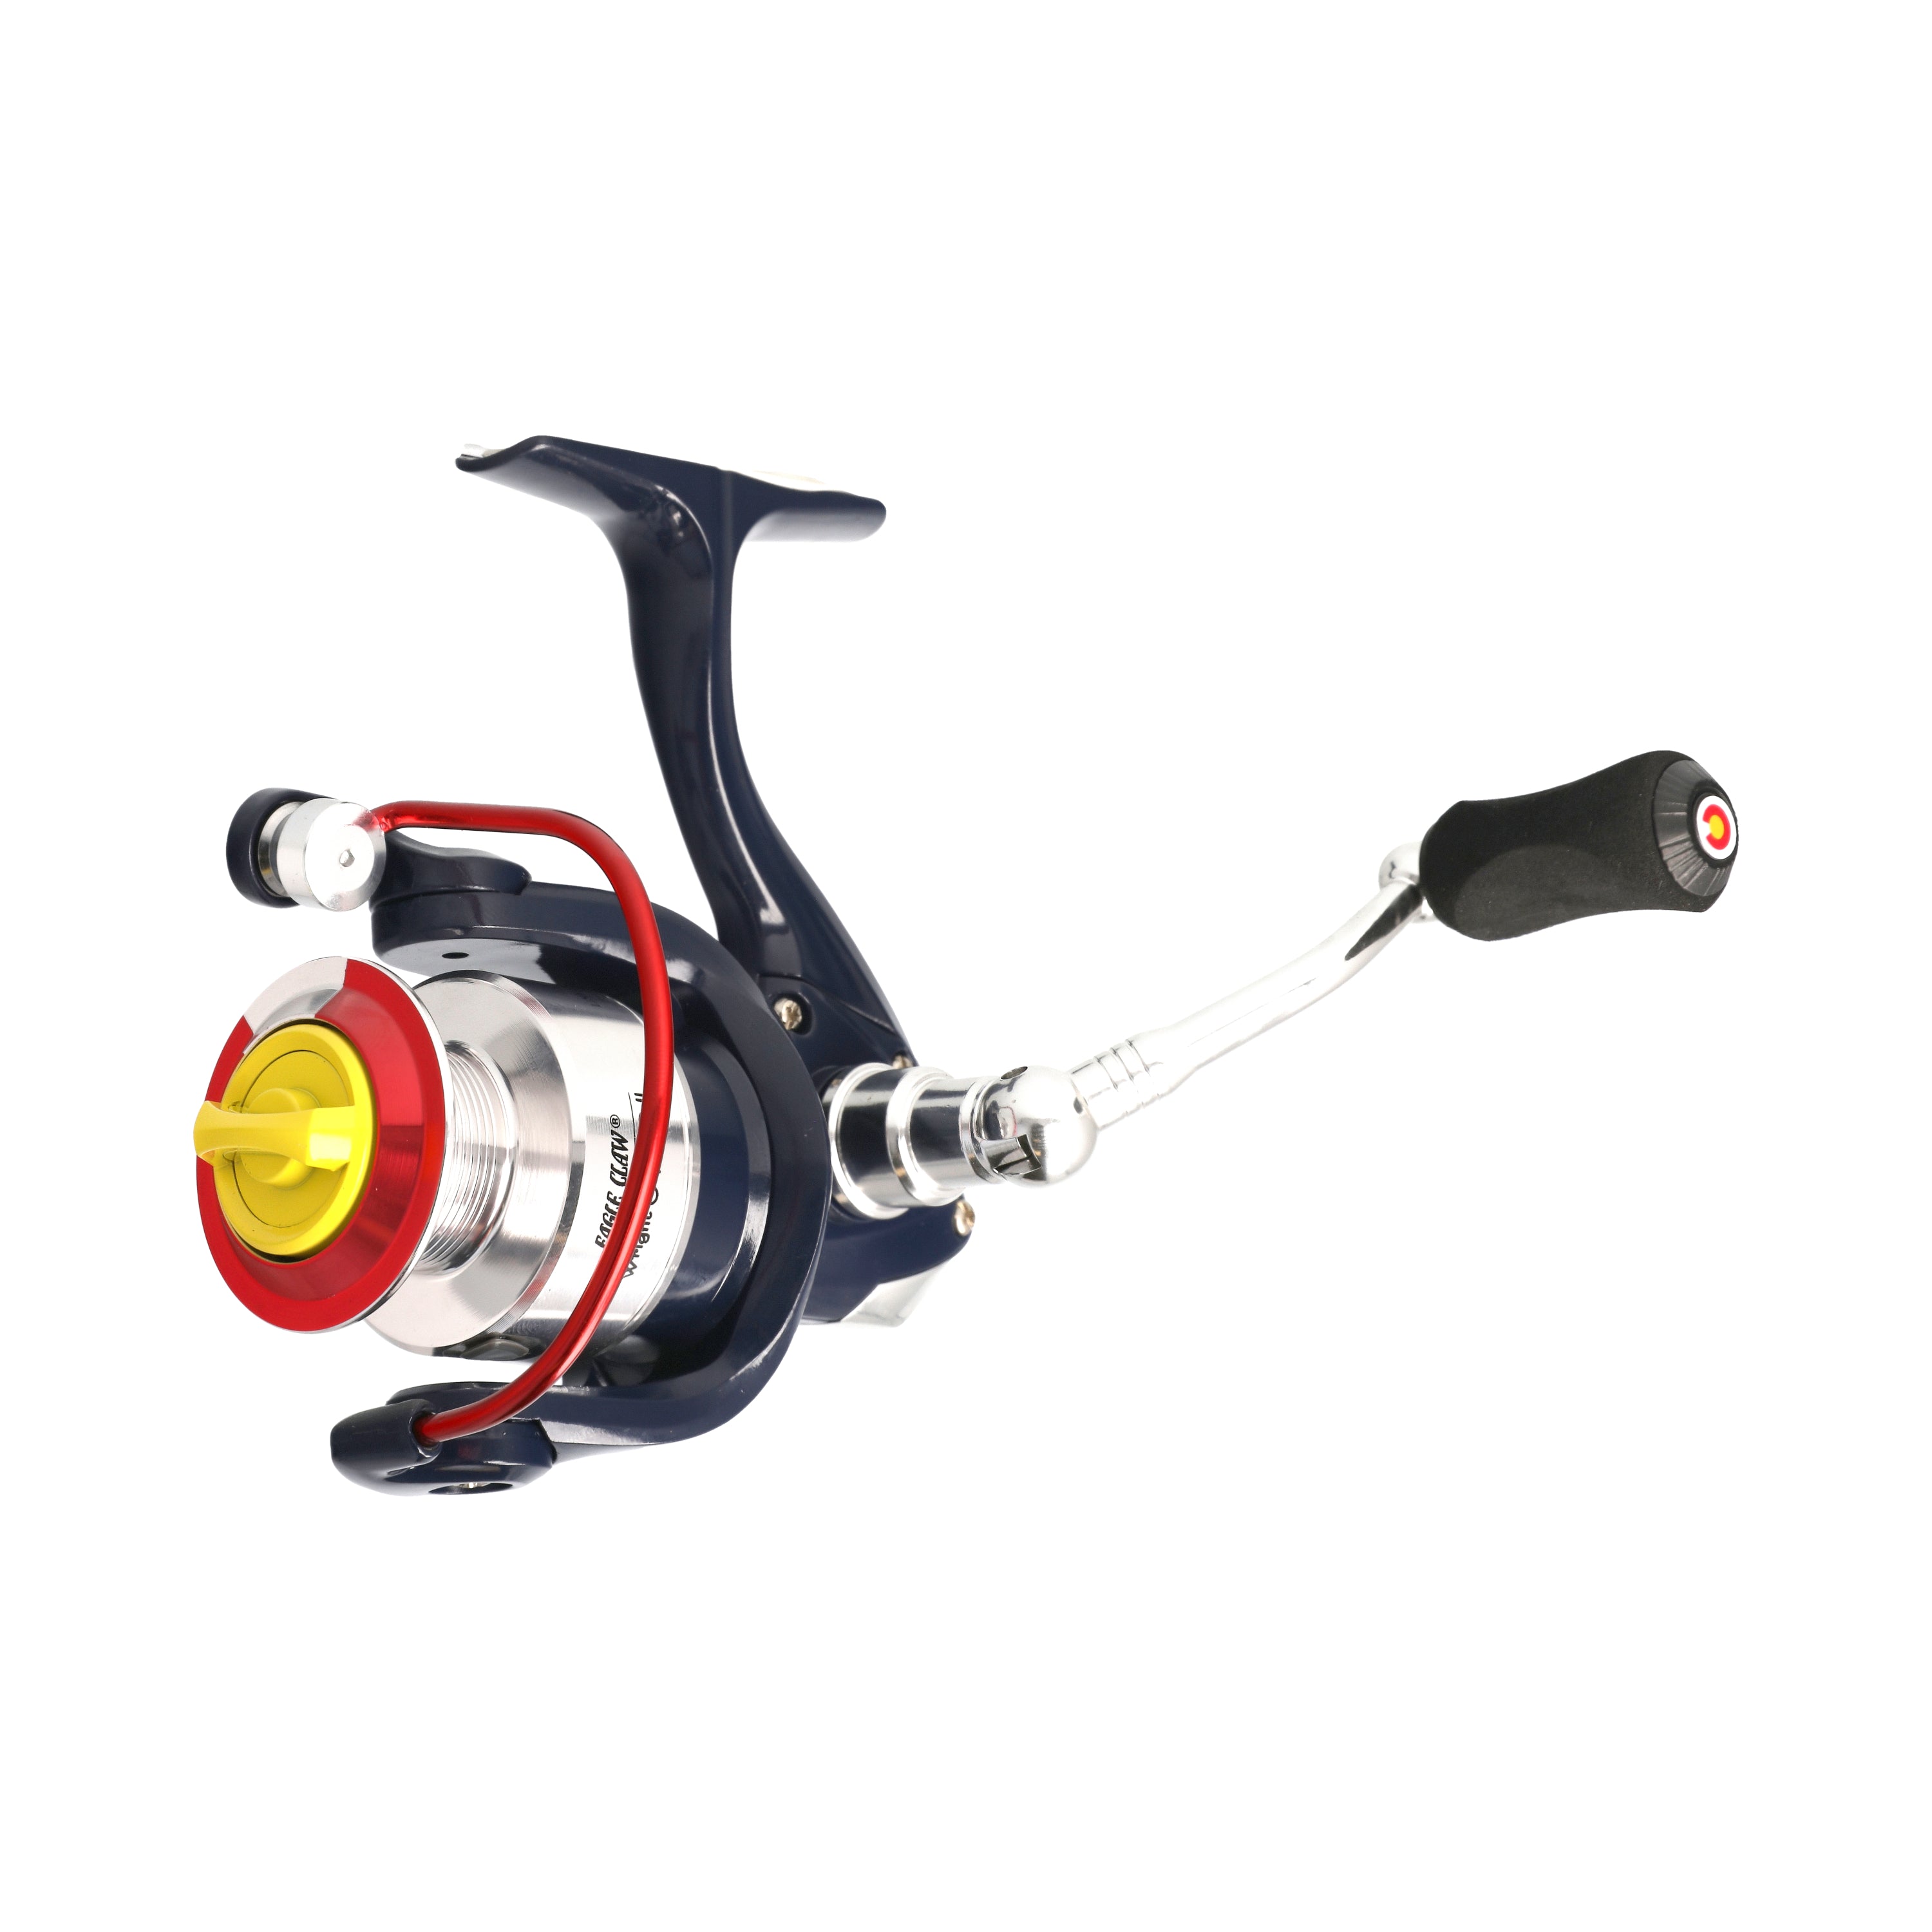 EAGLE CLAW 7050 SPINNING REEL & A FISHING VEST